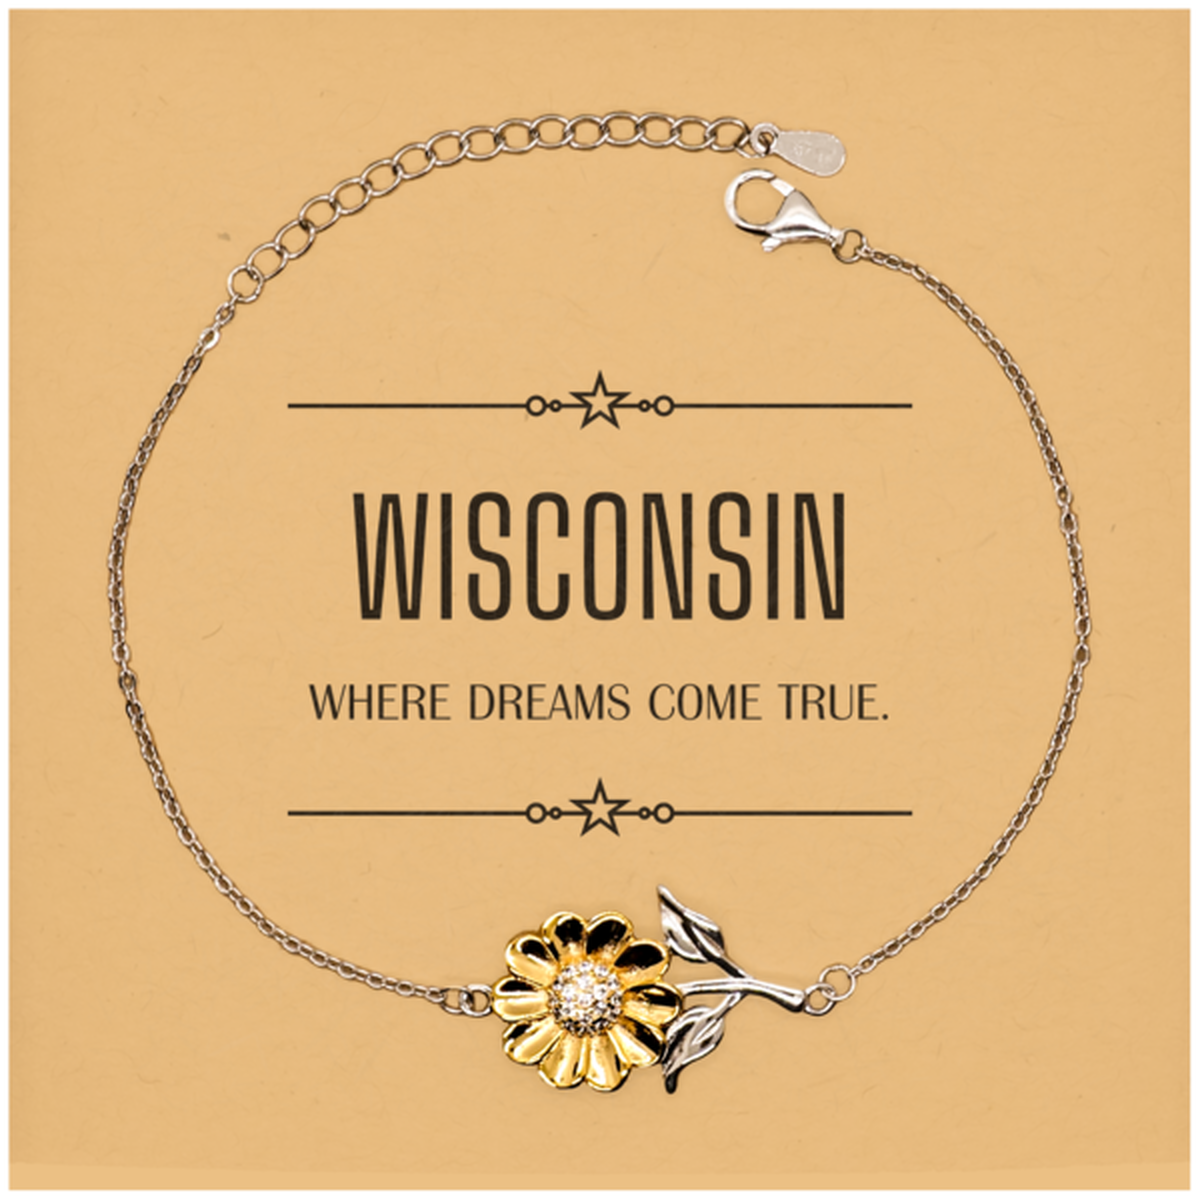 Love Wisconsin State Sunflower Bracelet, Wisconsin Where dreams come true, Birthday Christmas Inspirational Gifts For Wisconsin Men, Women, Friends